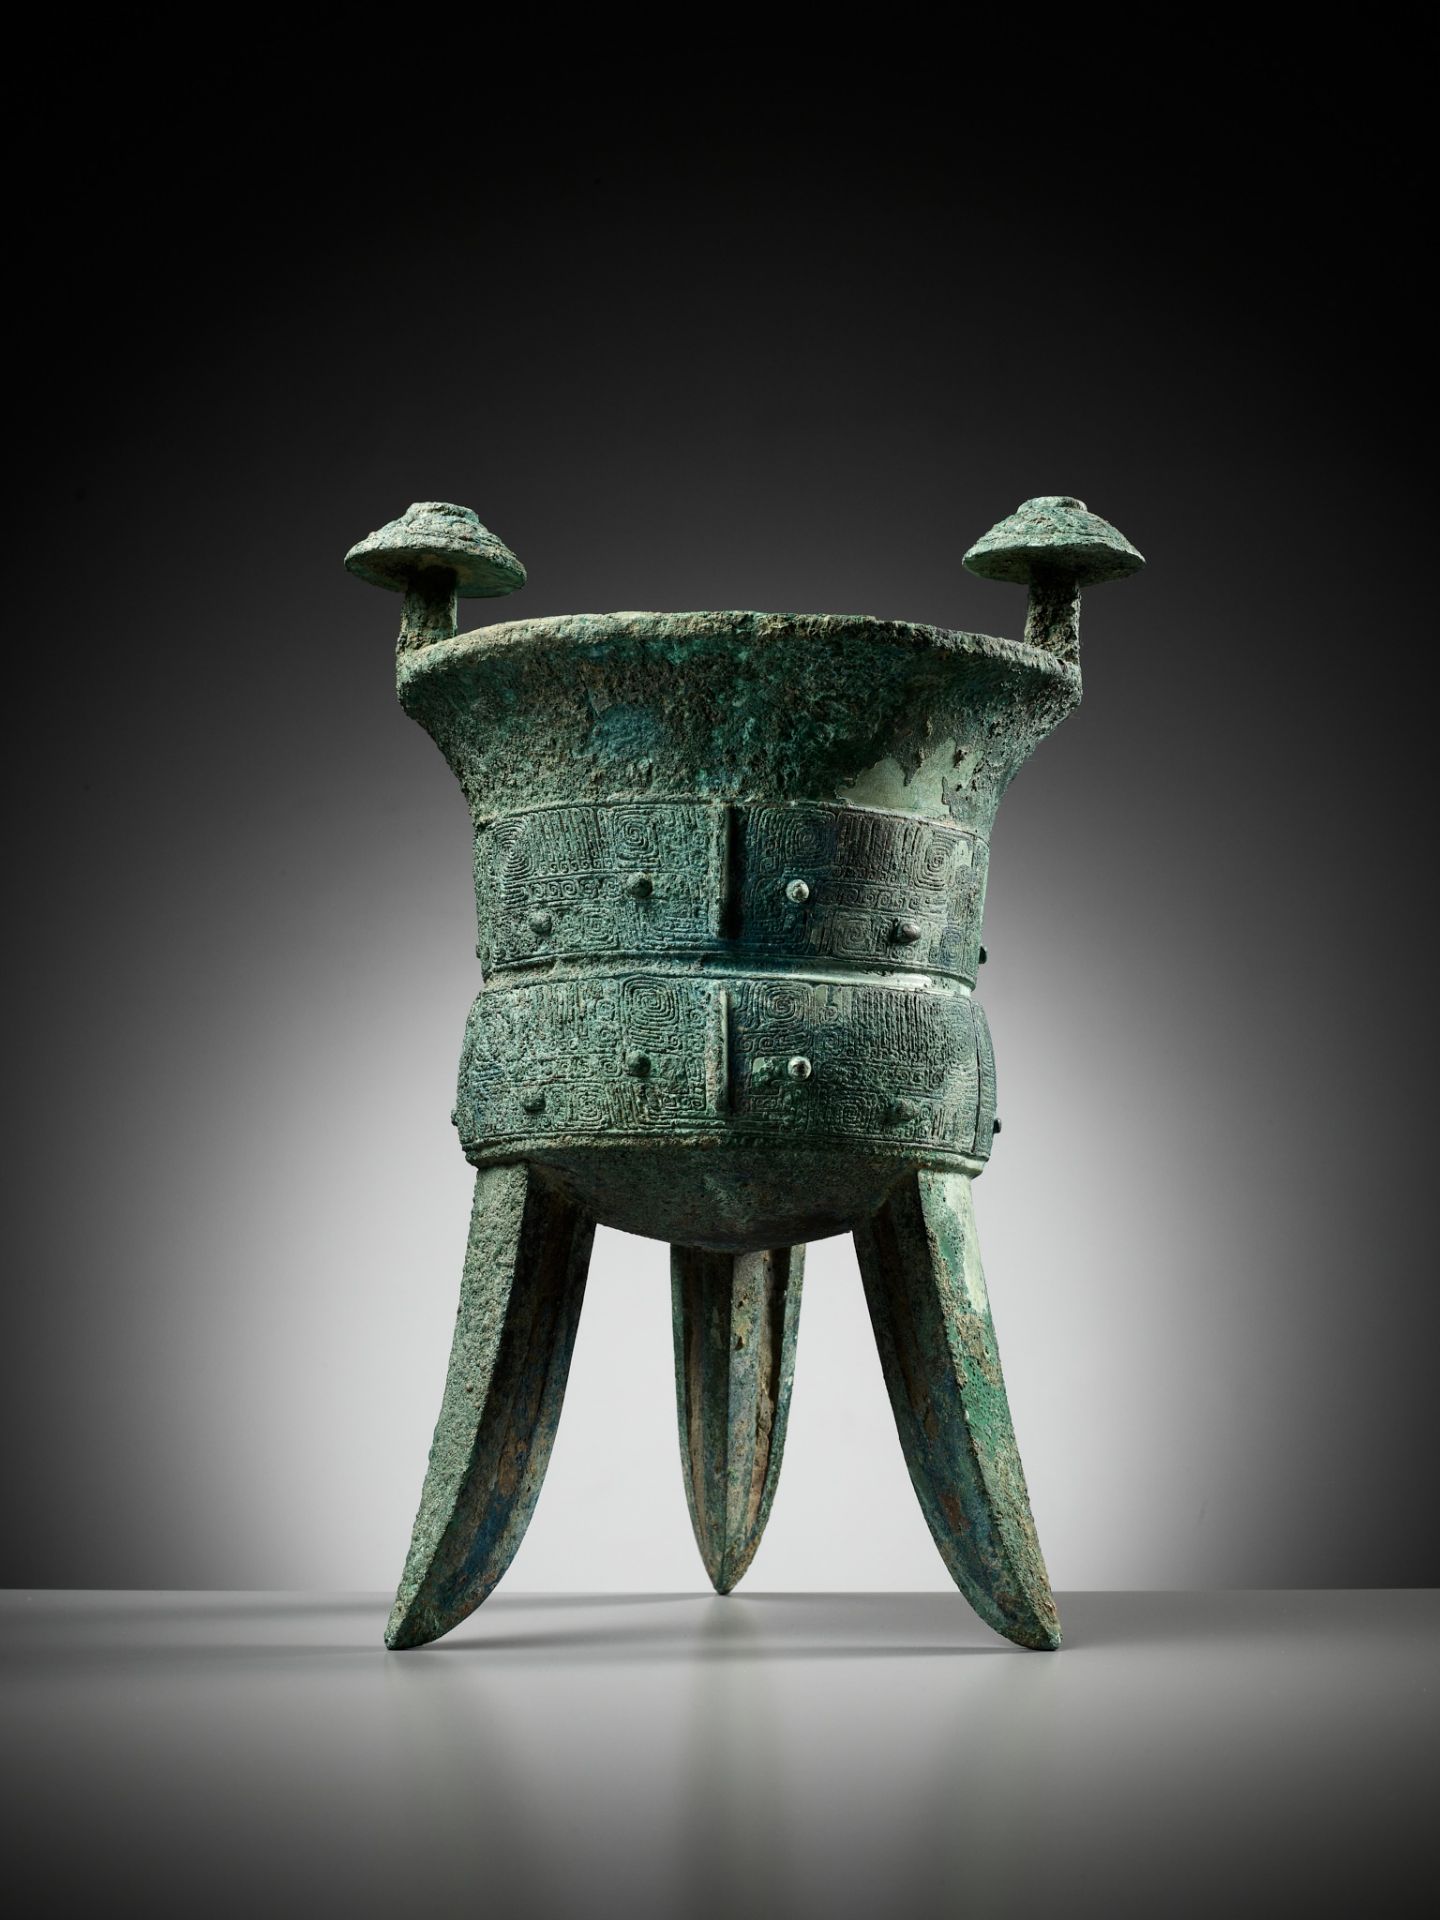 AN EXCEPTIONALLY LARGE AND MASSIVE BRONZE RITUAL TRIPOD WINE VESSEL, JIA, WITH A CLAN MARK, SHANG - Image 3 of 29